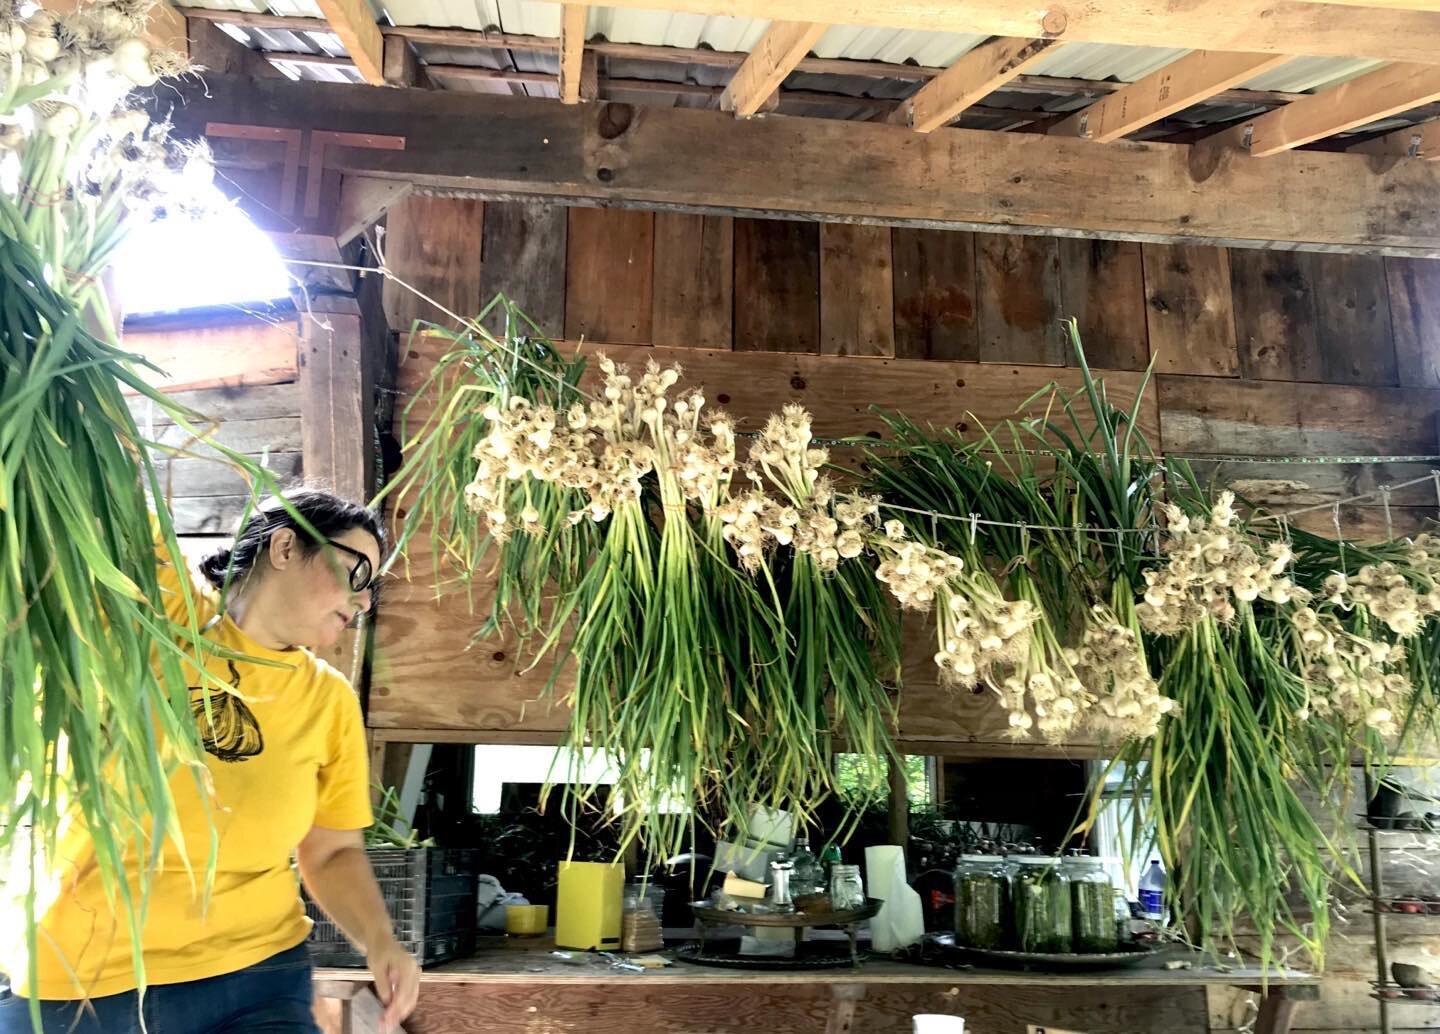 Into our 4th year of growing garlic and This year is the best harvest, best looking garlic we&rsquo;ve had! Looking forward to more of this amazing regenerative winter growing hudson valley immunity vampire warding special bulb! Highly recommend star